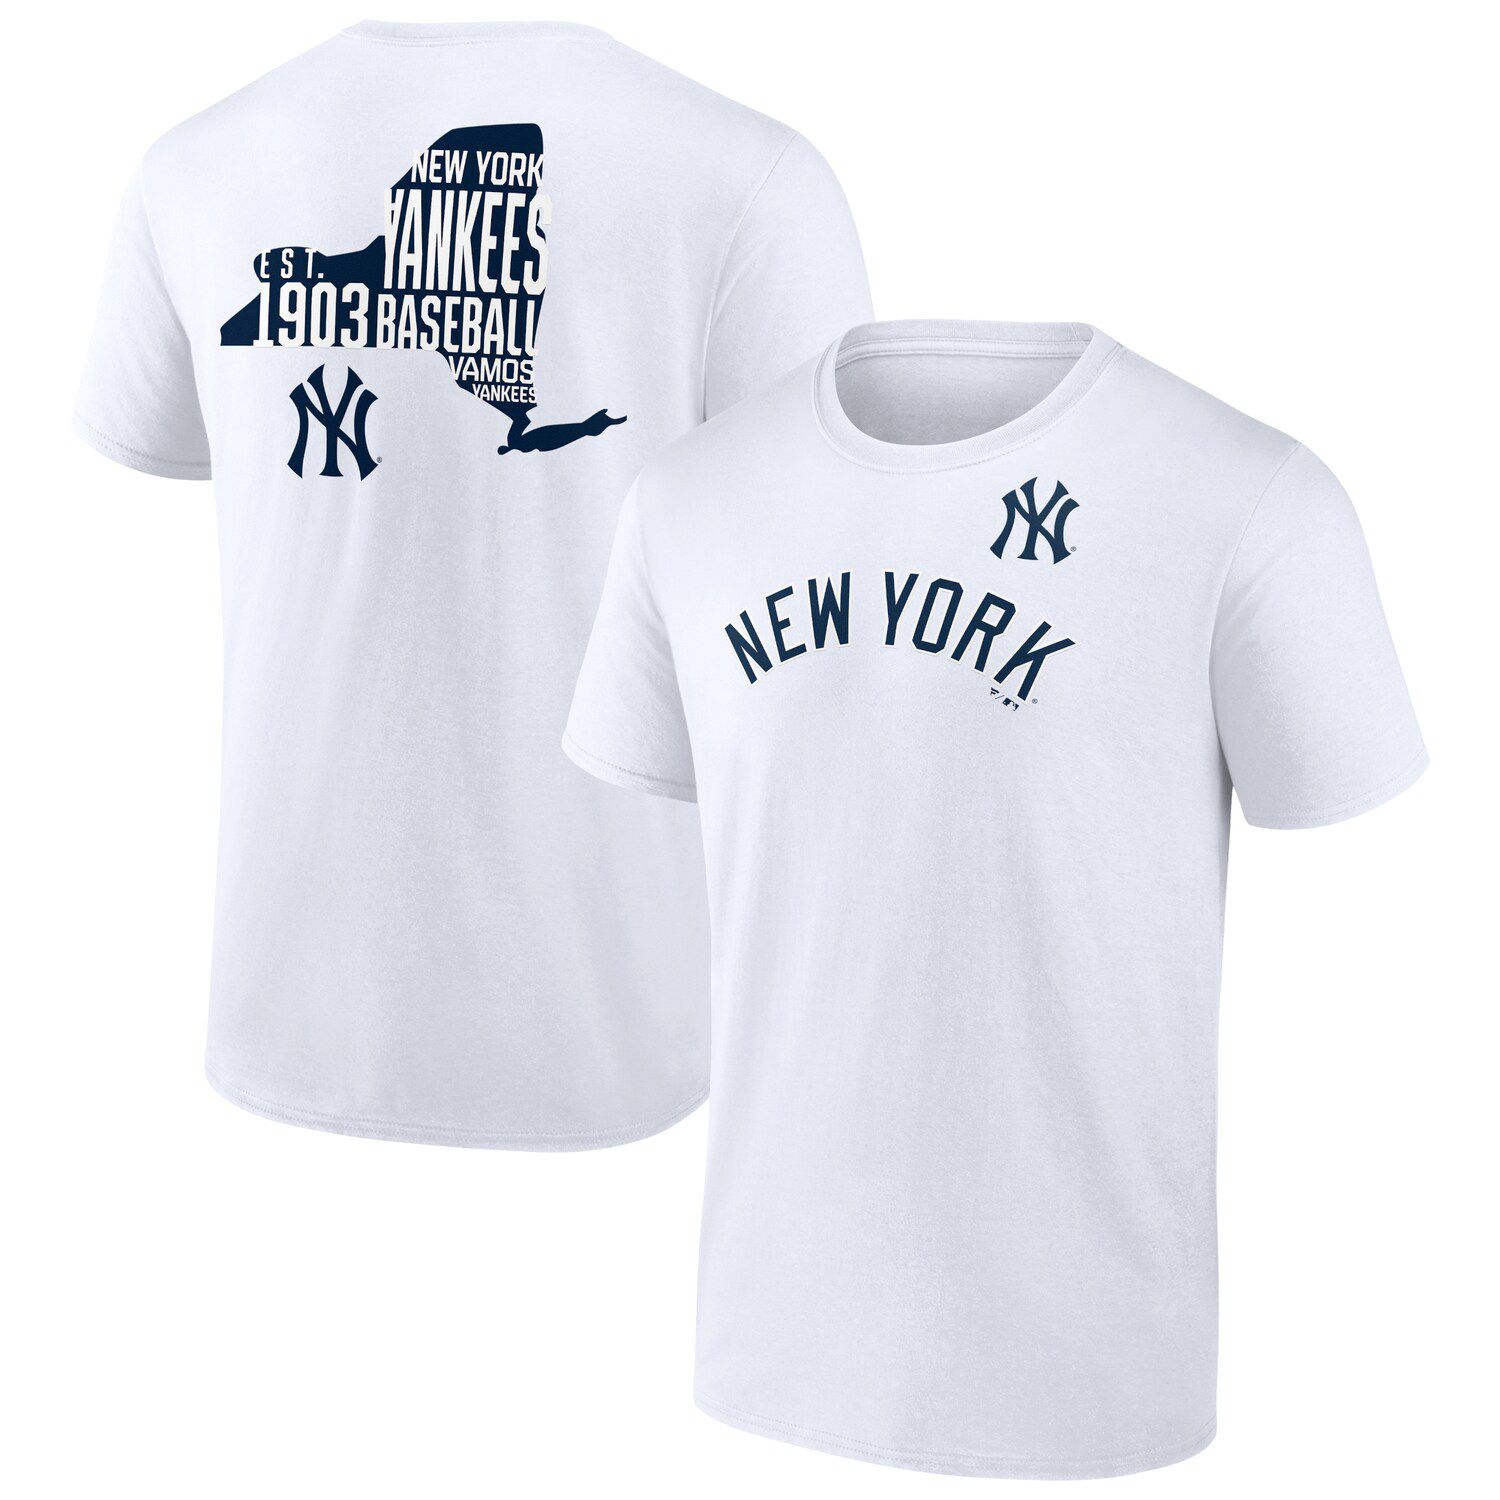 Men's Fanatics Branded Heathered Gray New York Yankees Iconic Team Element Speckled Ringer T-Shirt